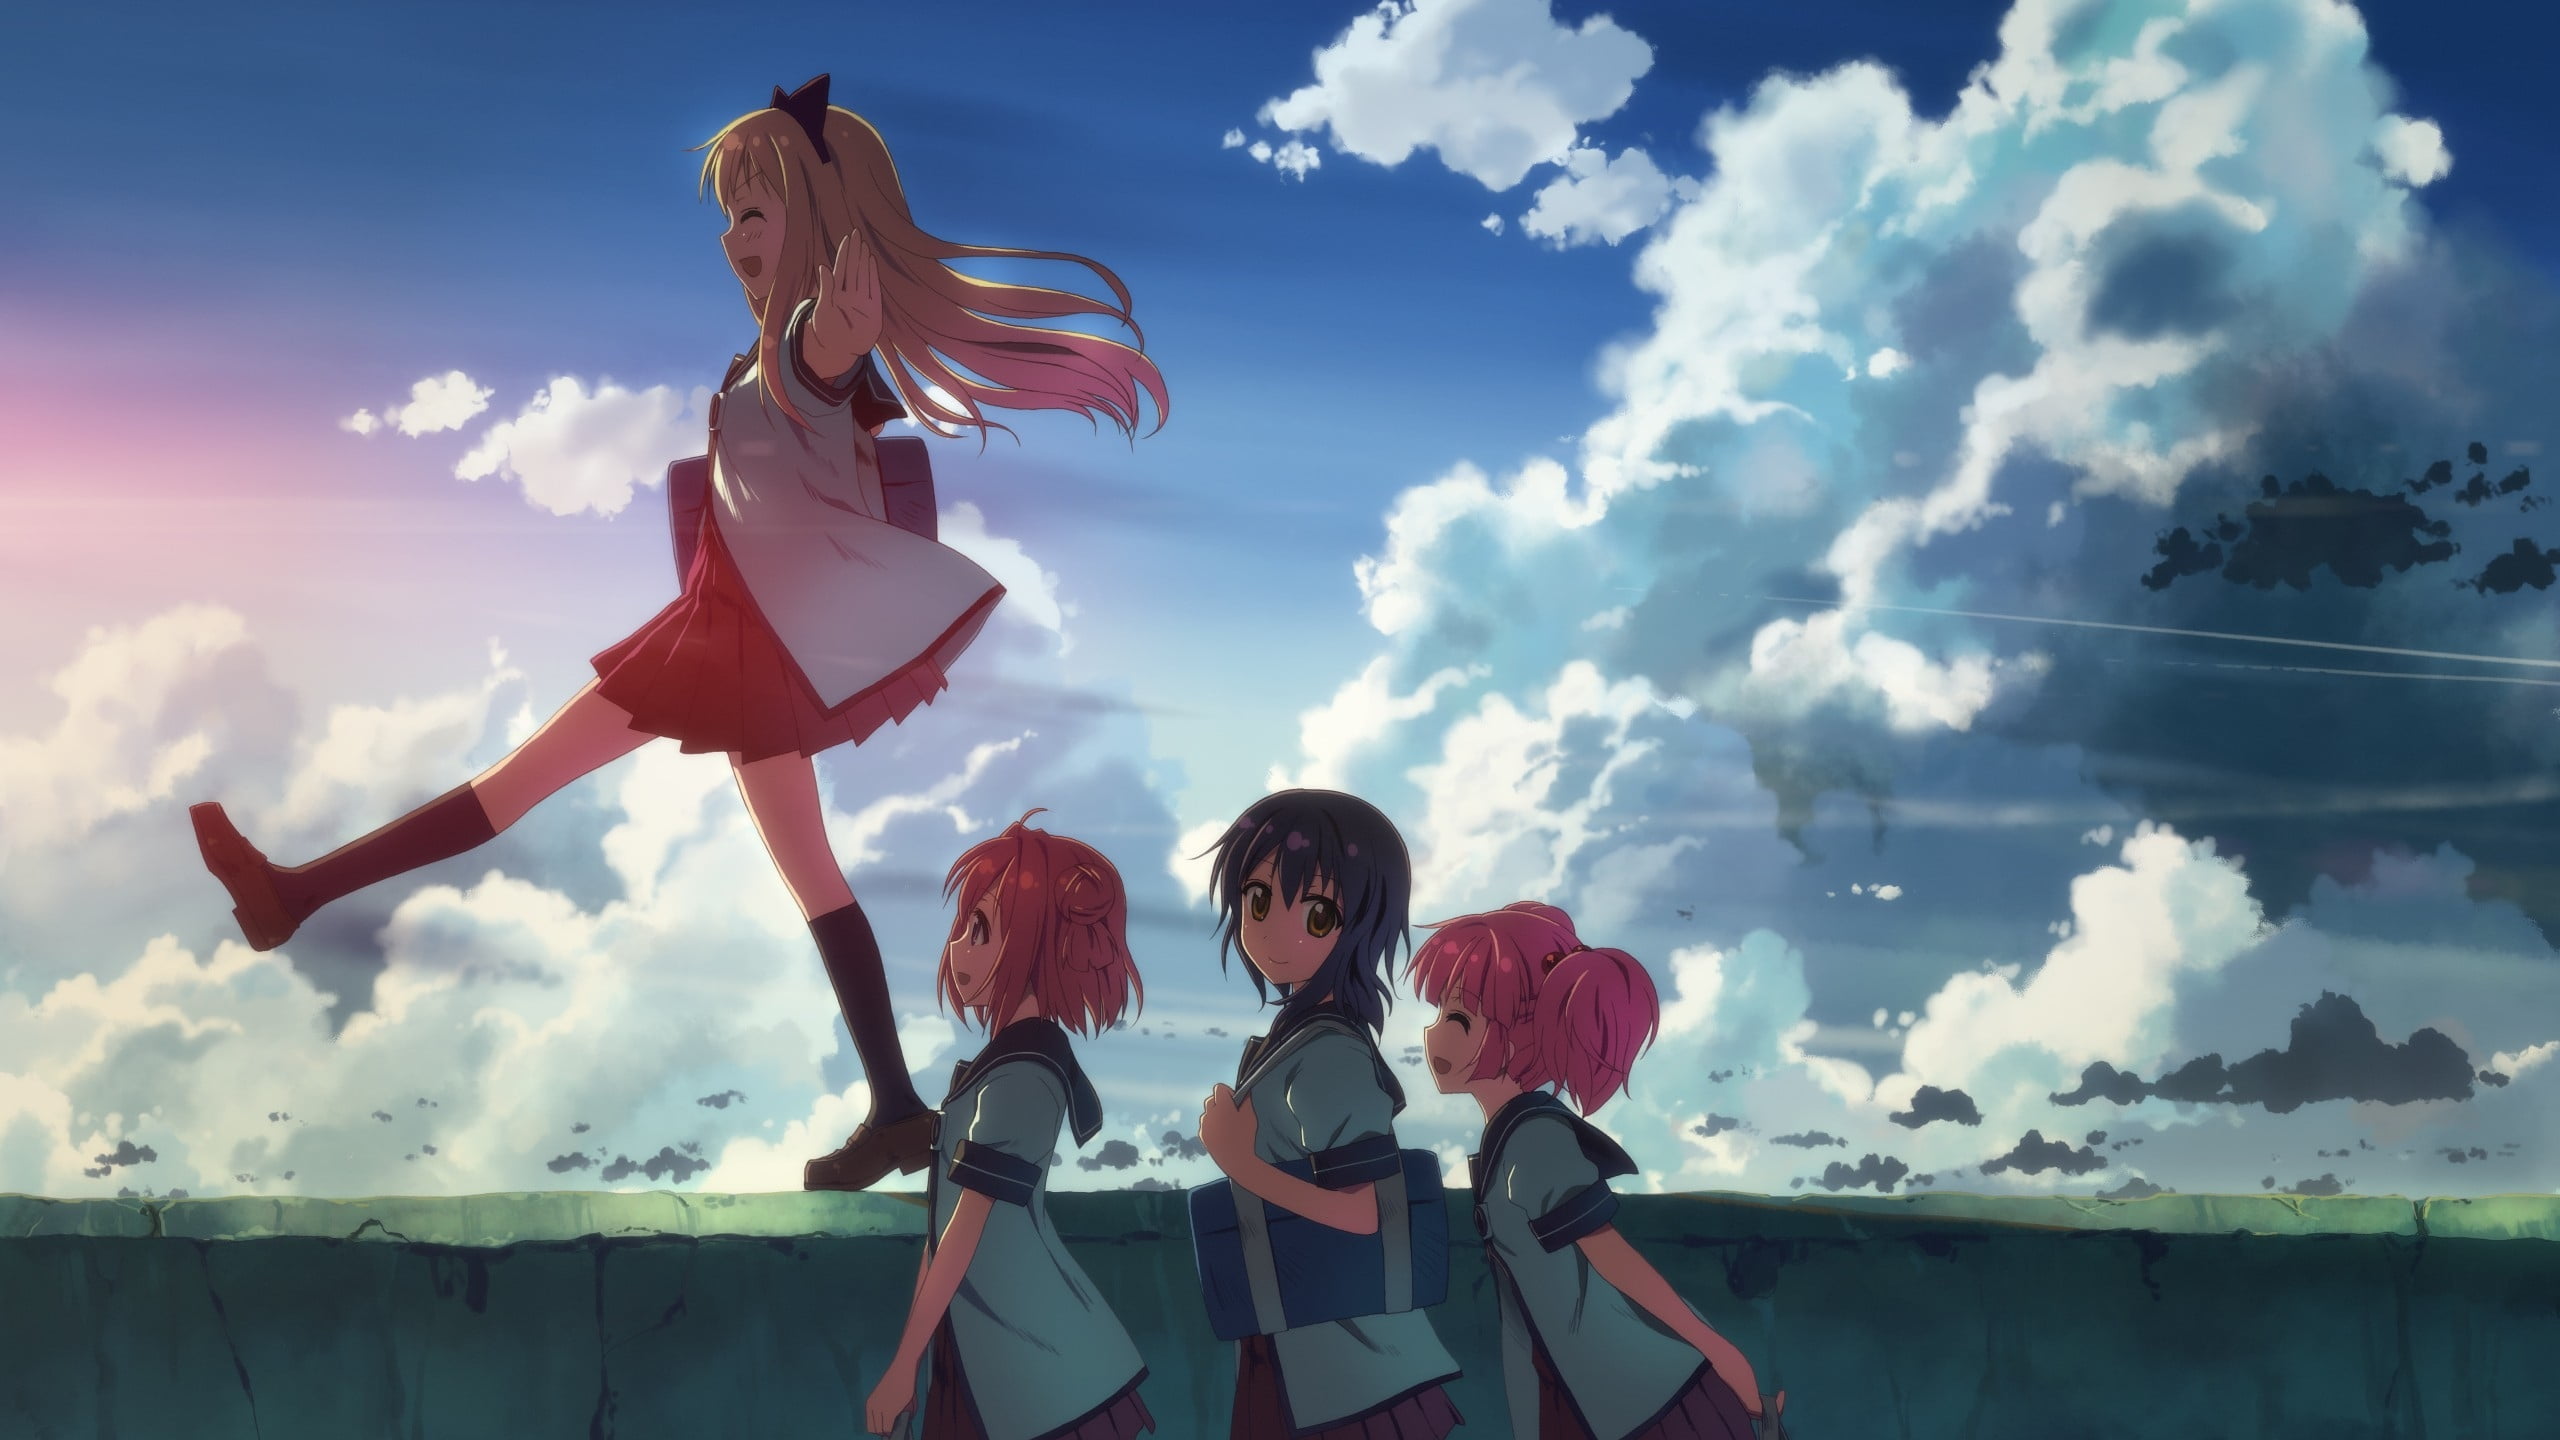 female anime character walking at the field illustration Darling in the  FranXX Zero Two Darling in the Fra  Anime characters Female anime  Darling in the franxx